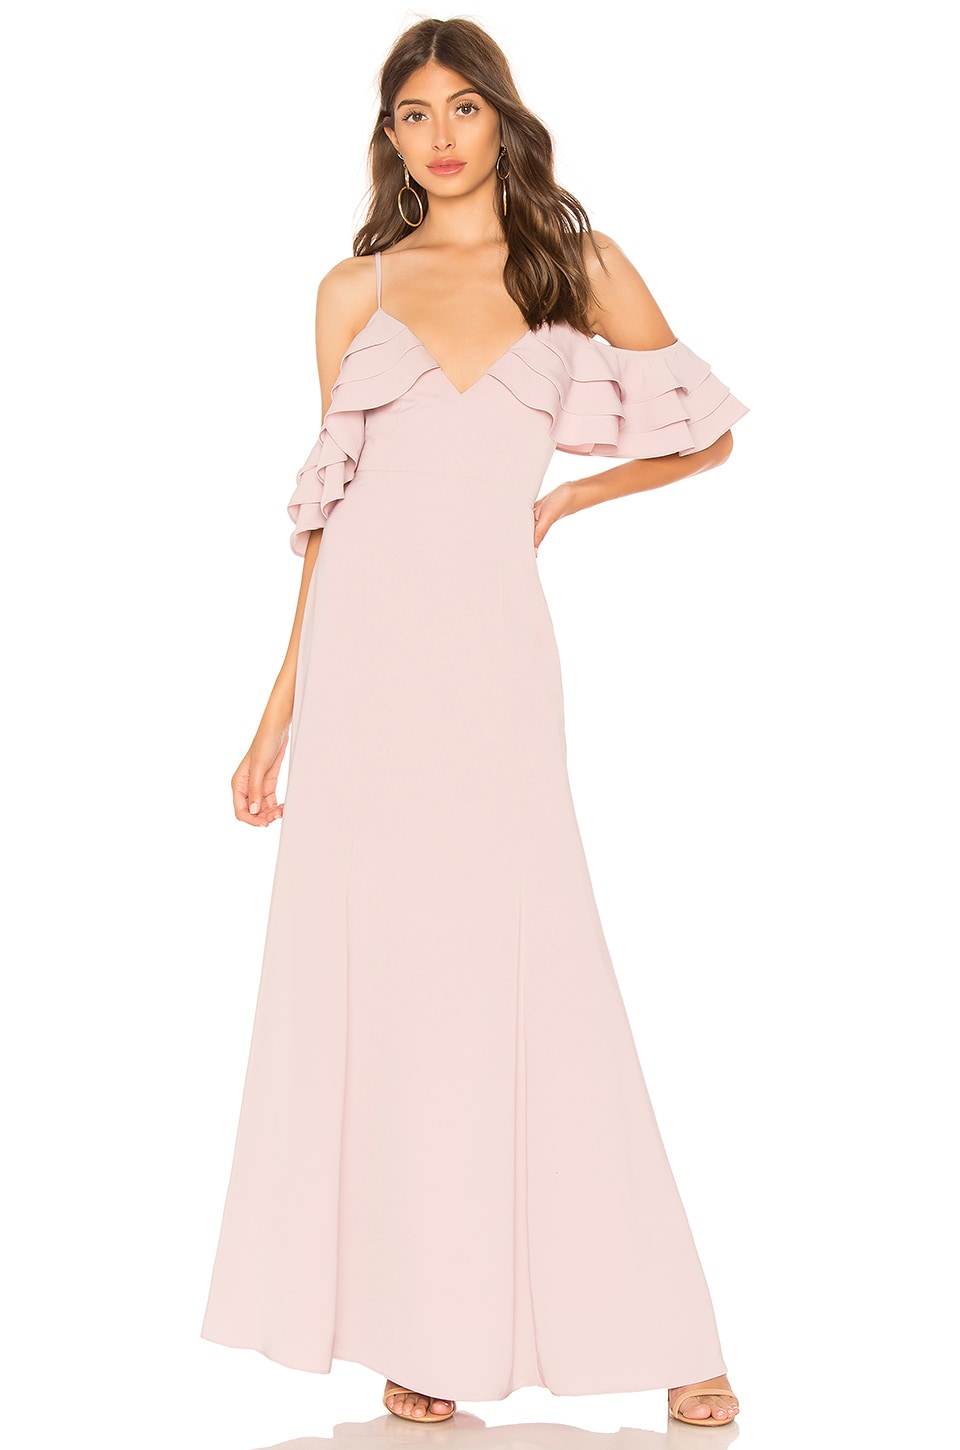 About Us Bell Ruffle Maxi Dress in Mauve | REVOLVE